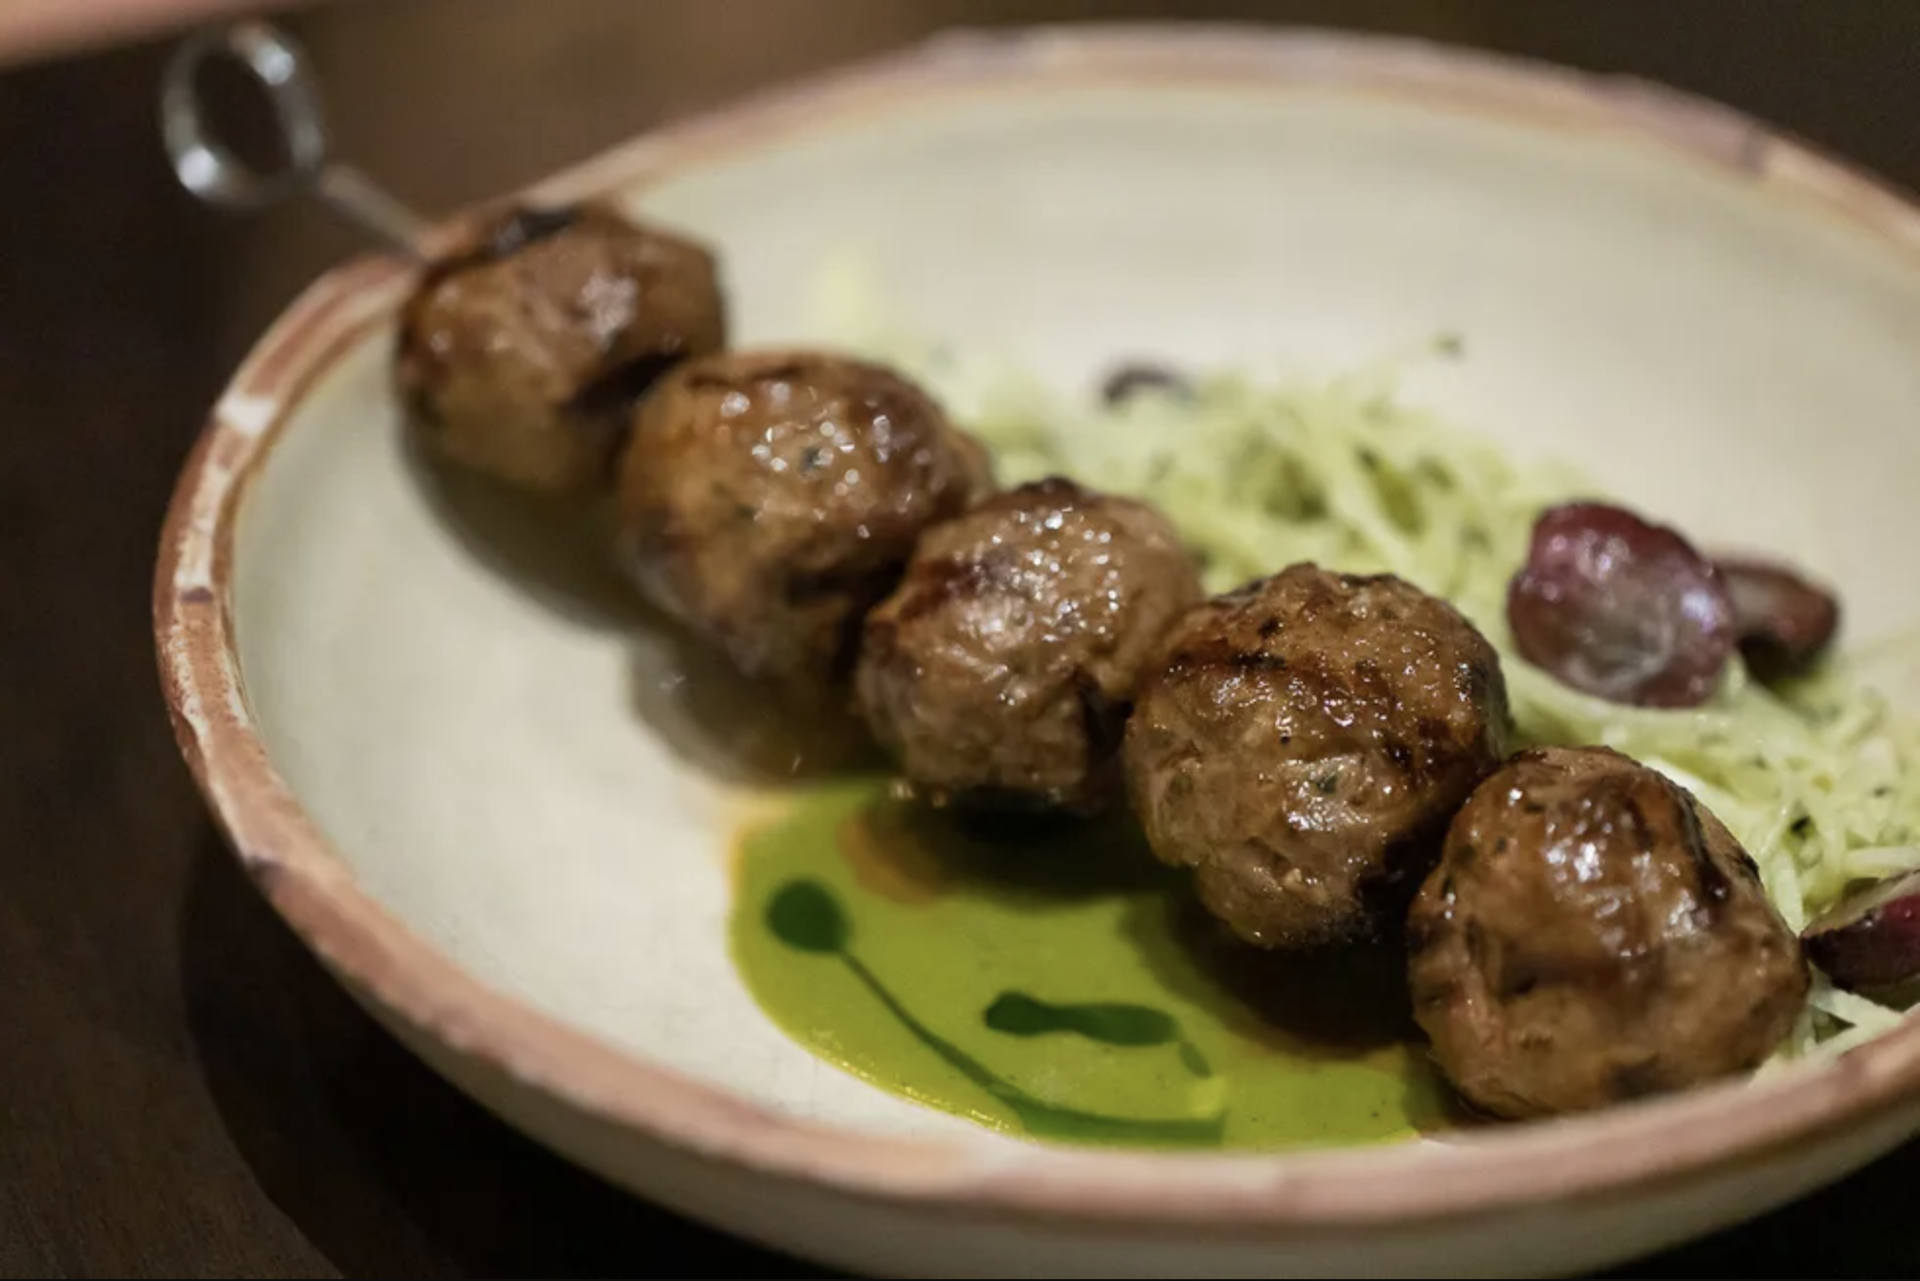 A skewer of five tender kefta meatballs, on a pool of cilantro vinaigrette, is served with a chilled salad of shaved jicama and halved grapes for a refreshing contrast.